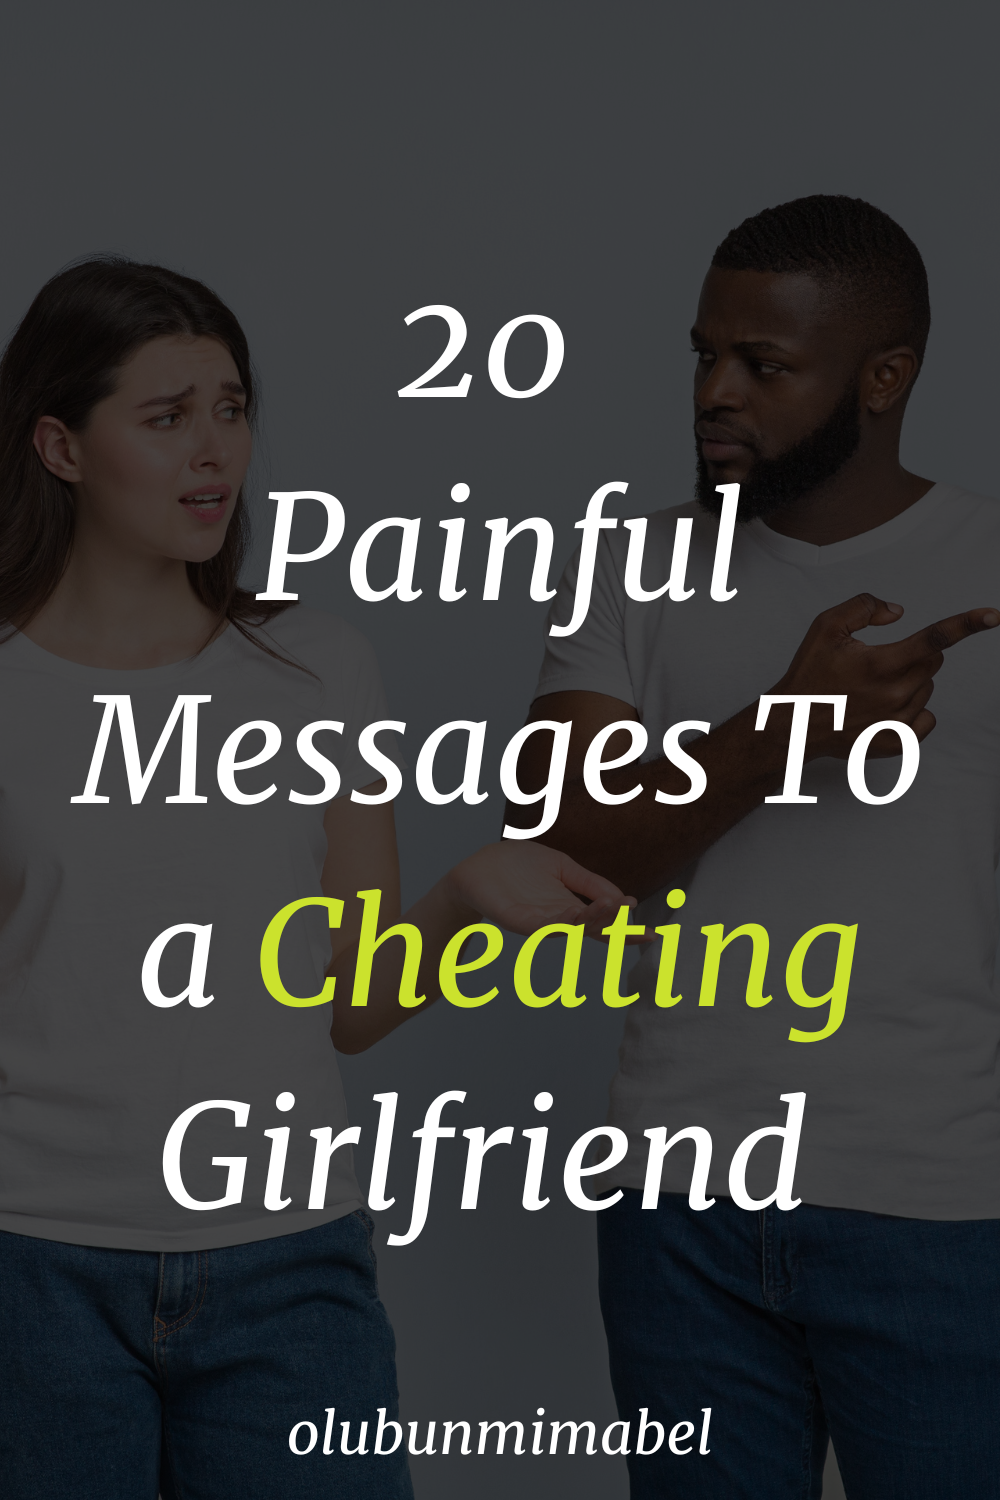 Painful Messages To a Cheating Girlfriend